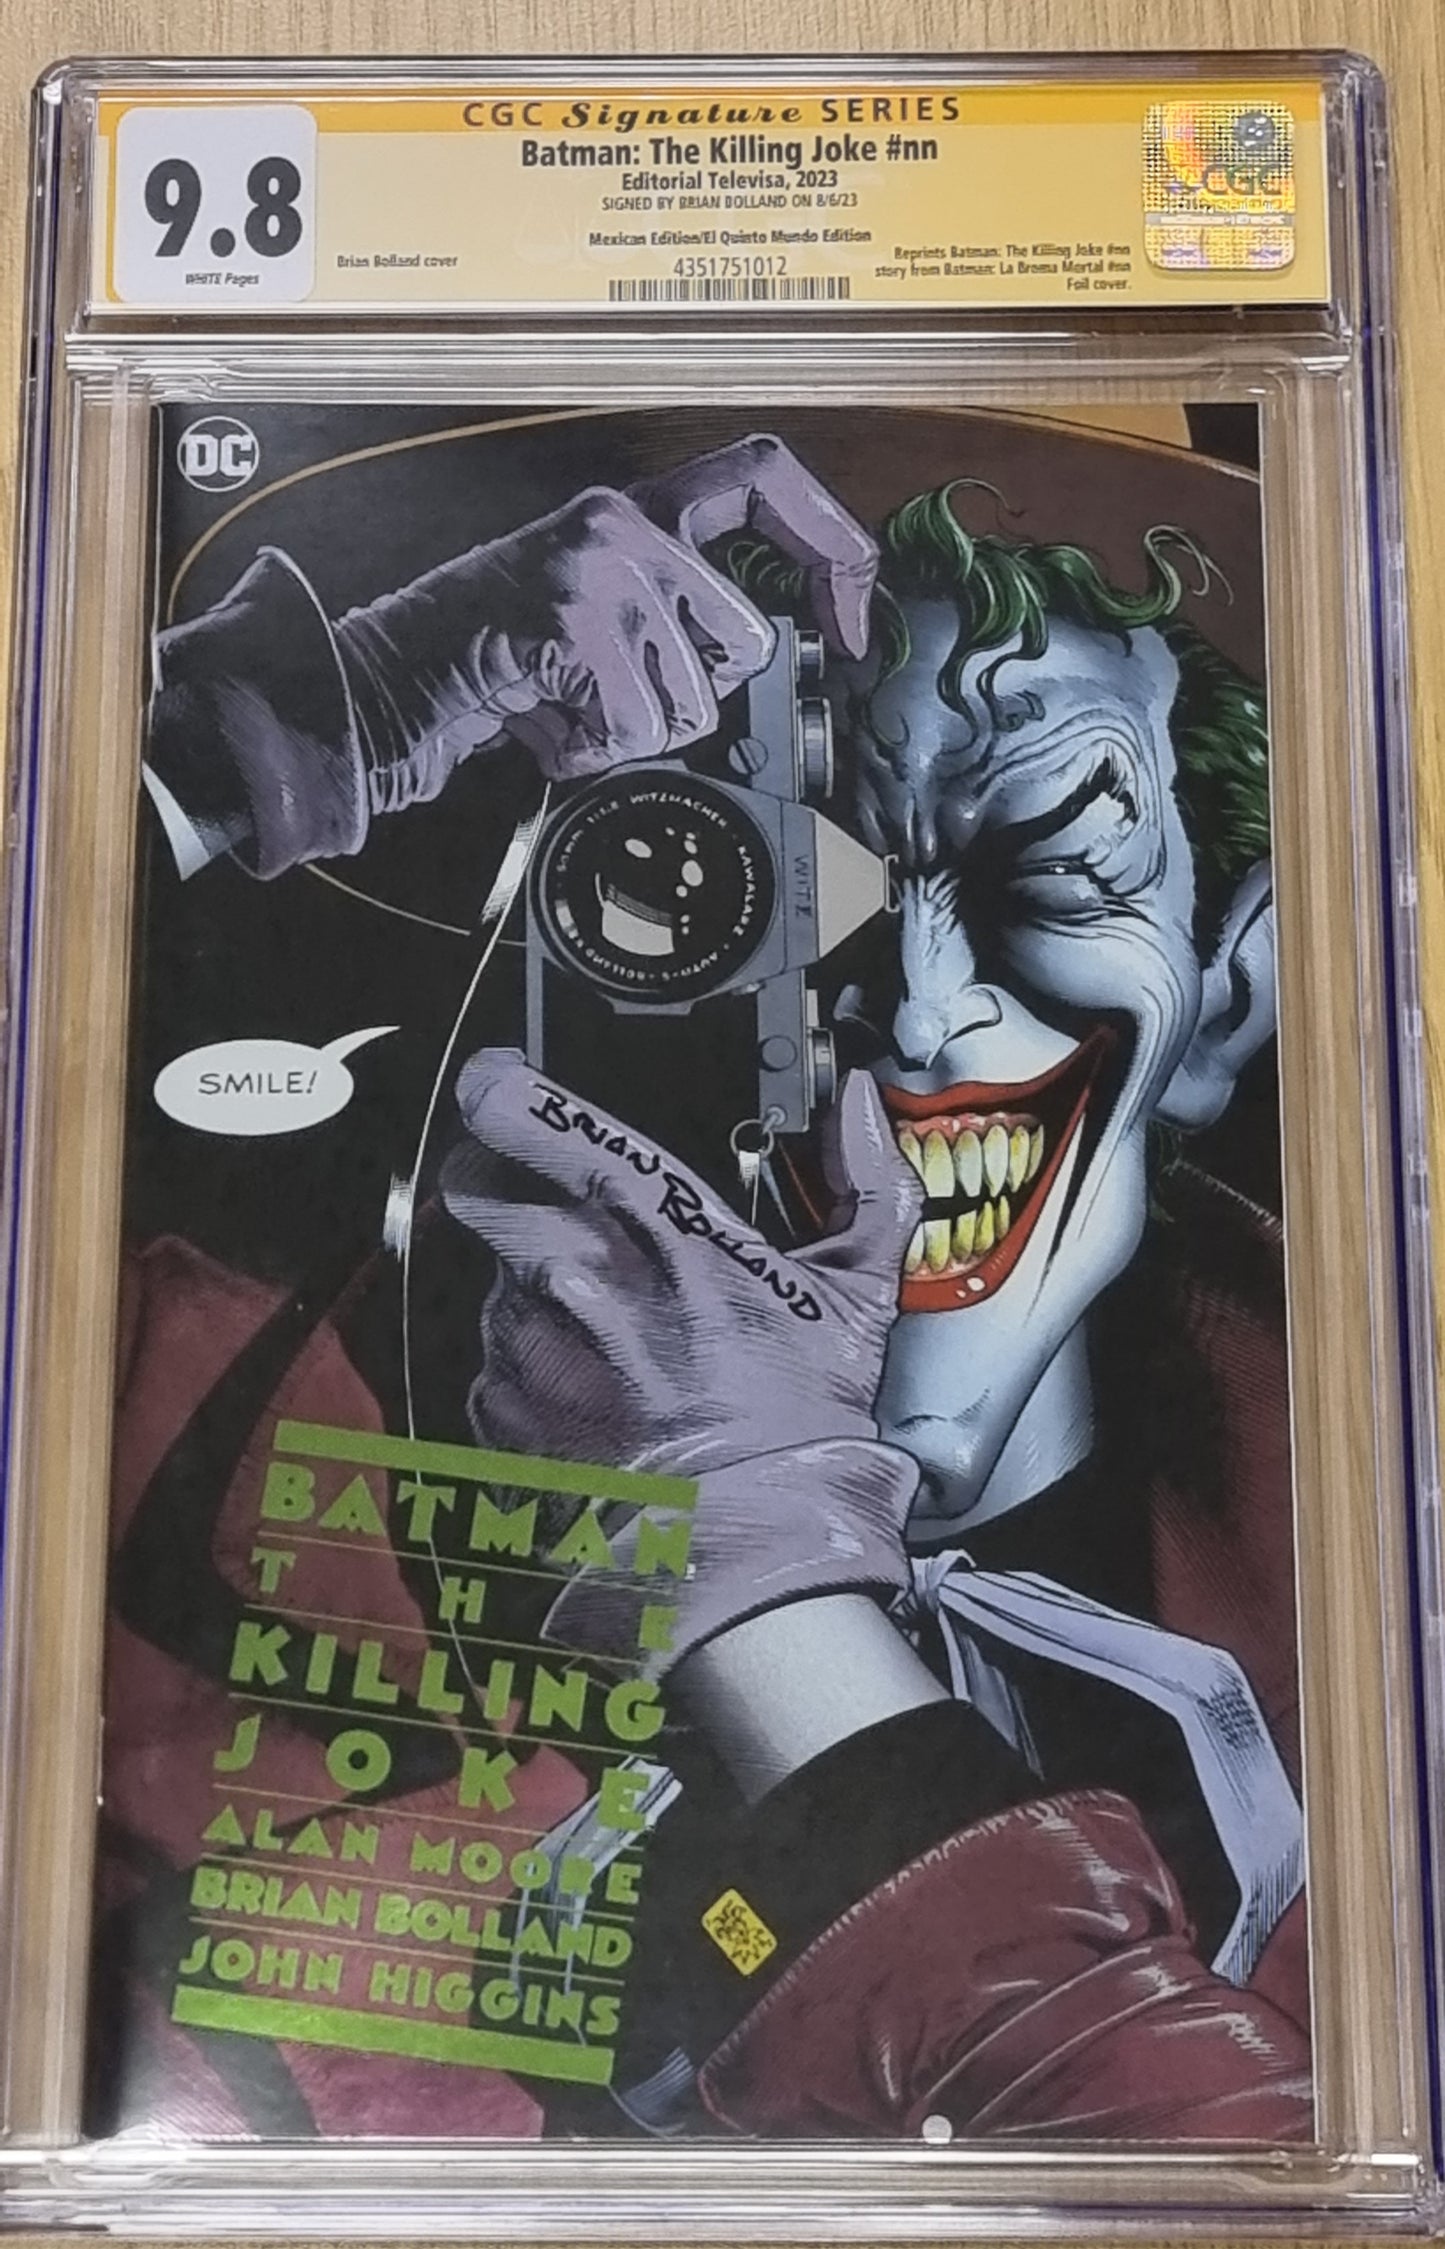 BATMAN : THE KILLING JOKE #1 BRIAN BOLLAND MEXICAN FOIL VARIANT LIMITED TO 1000 COPIES CGC SS 9.8